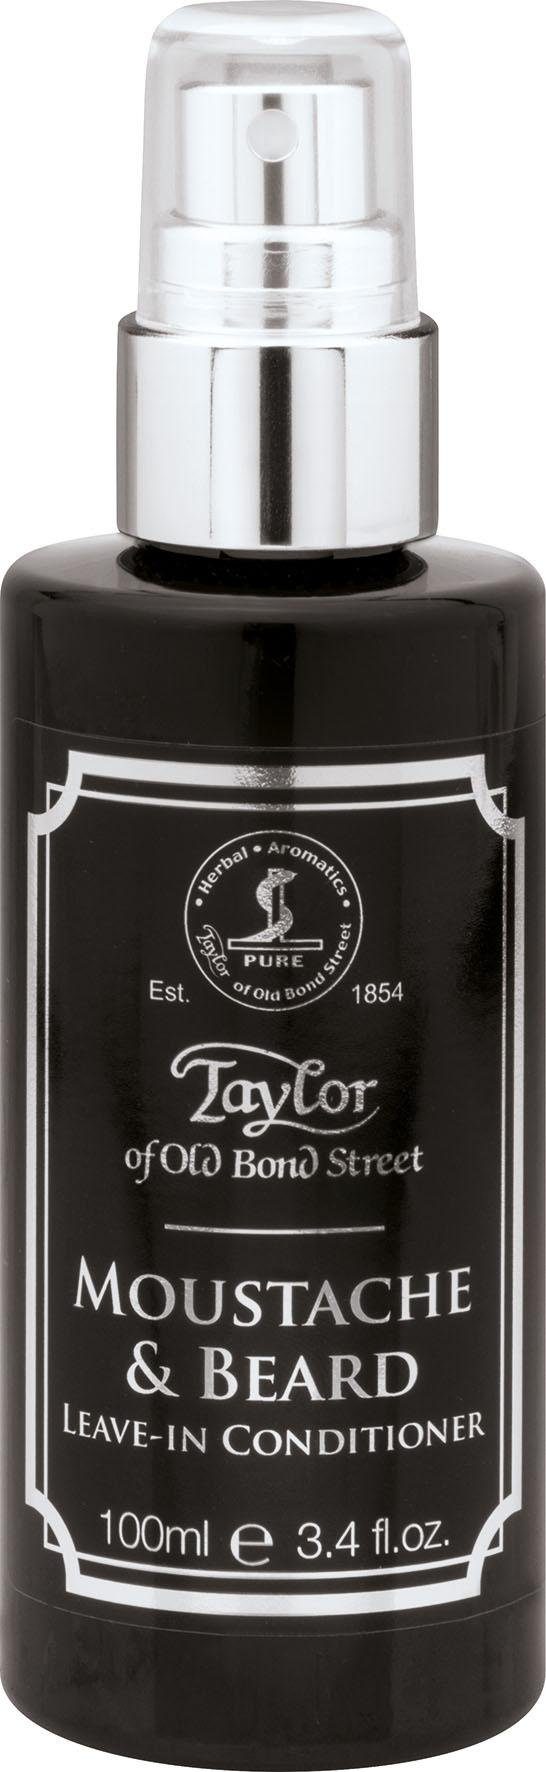 Taylor of & Moustache Leave-In Conditioner Street Bond Beard Old Bartconditioner